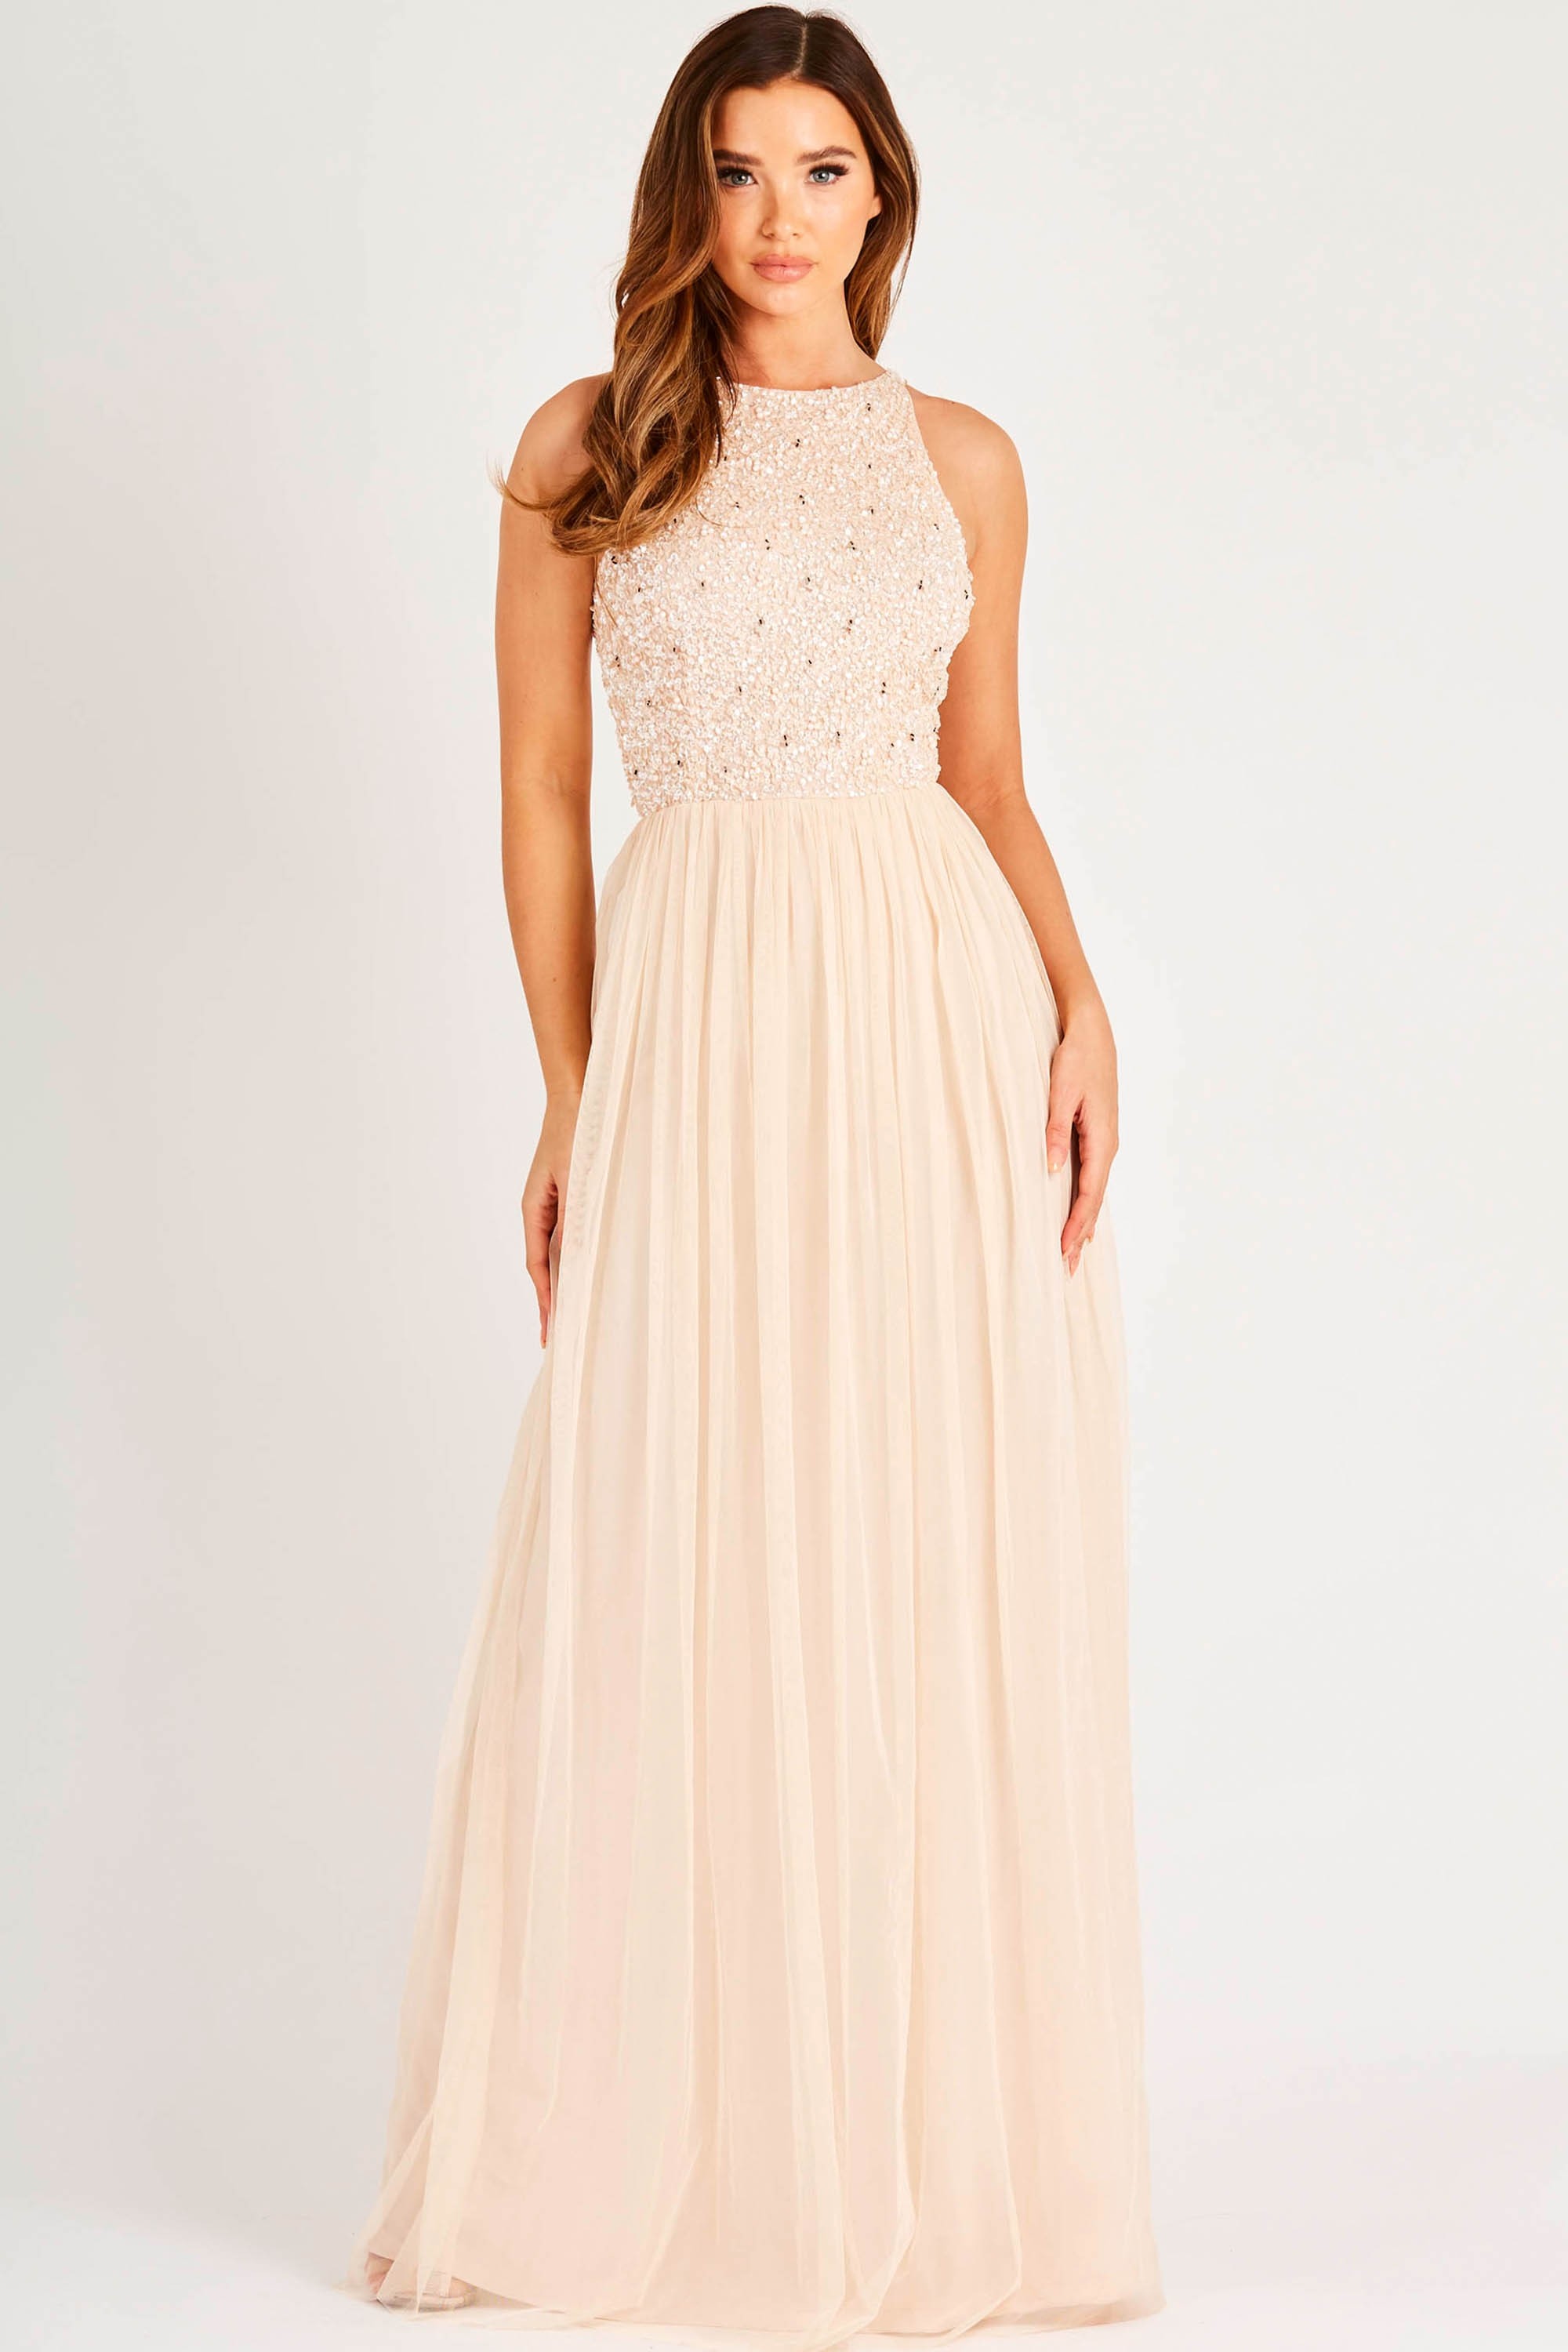 Nude Floral Embellished Bandeau Maxi Dress - from Little 